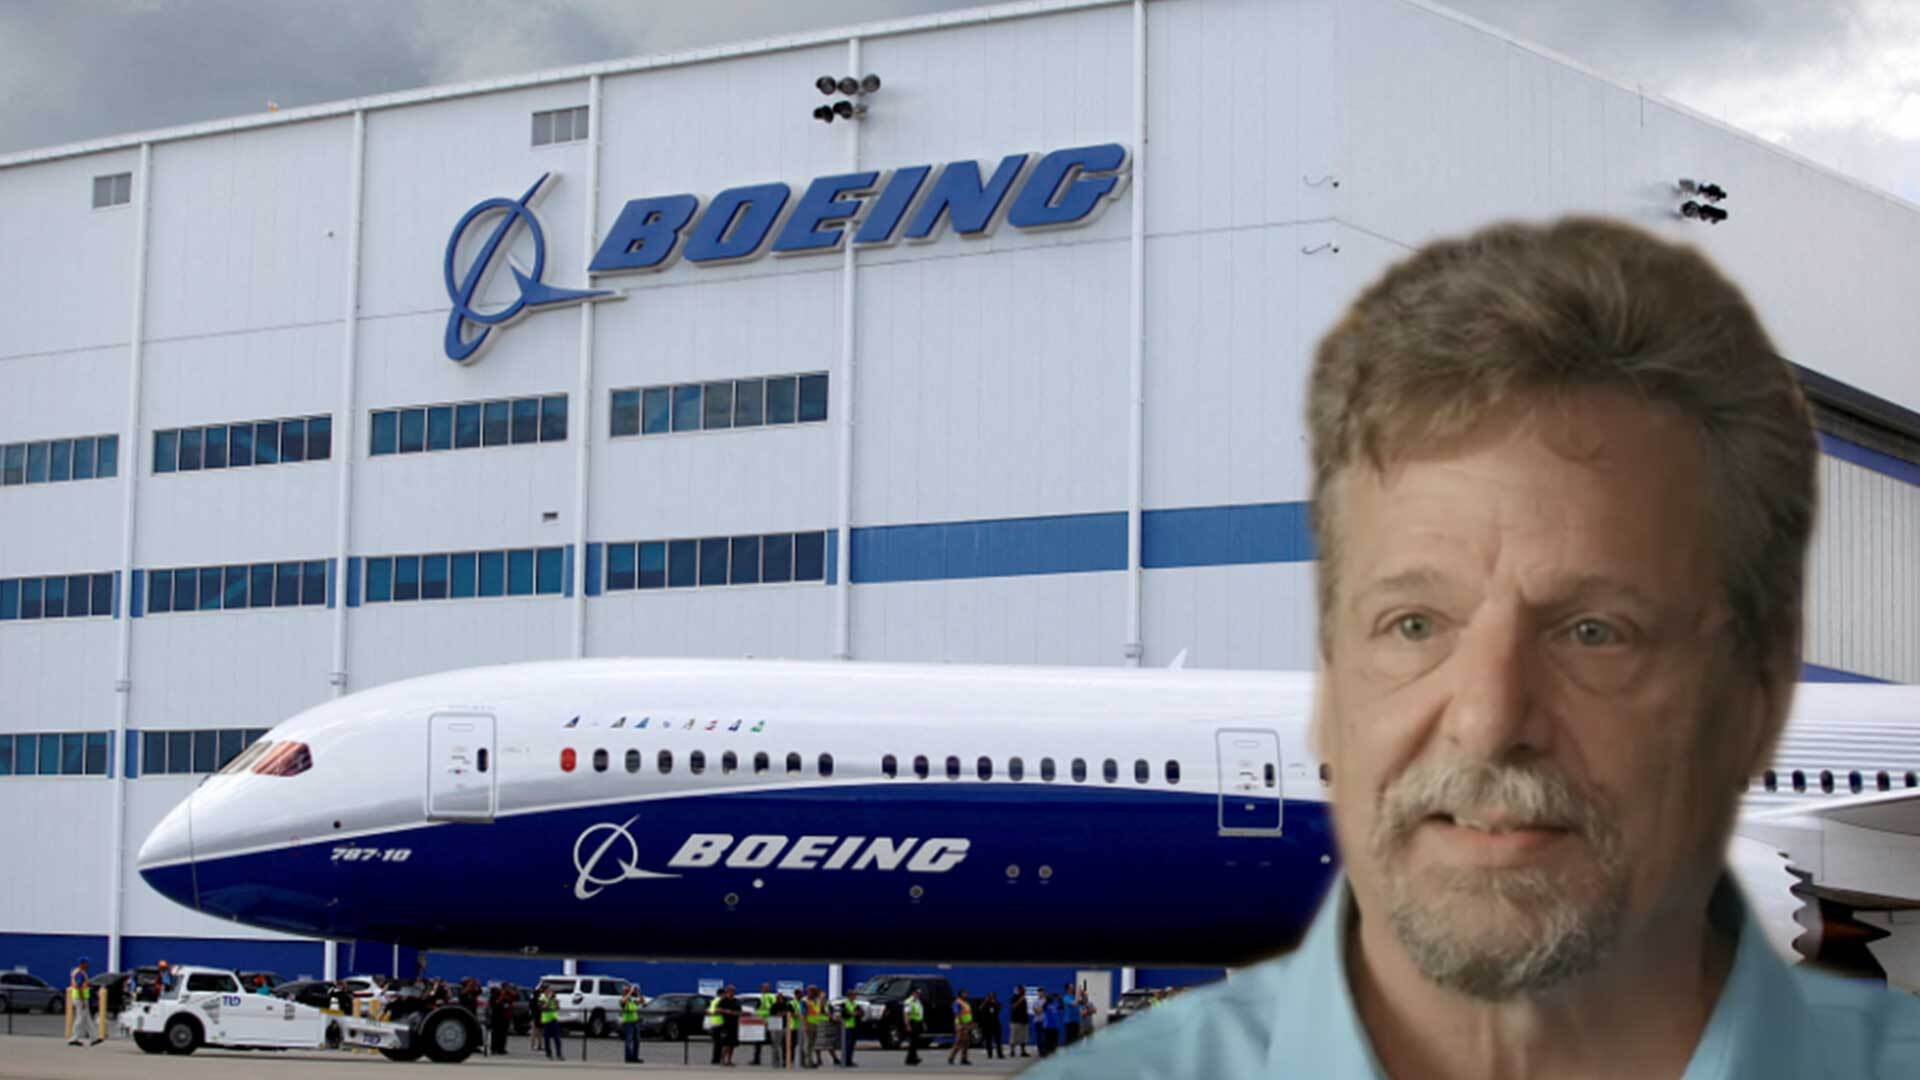 A former Boeing employee, involved in a whistleblower lawsuit against the company, was found dead from an apparent "self-inflicted" gunshot.